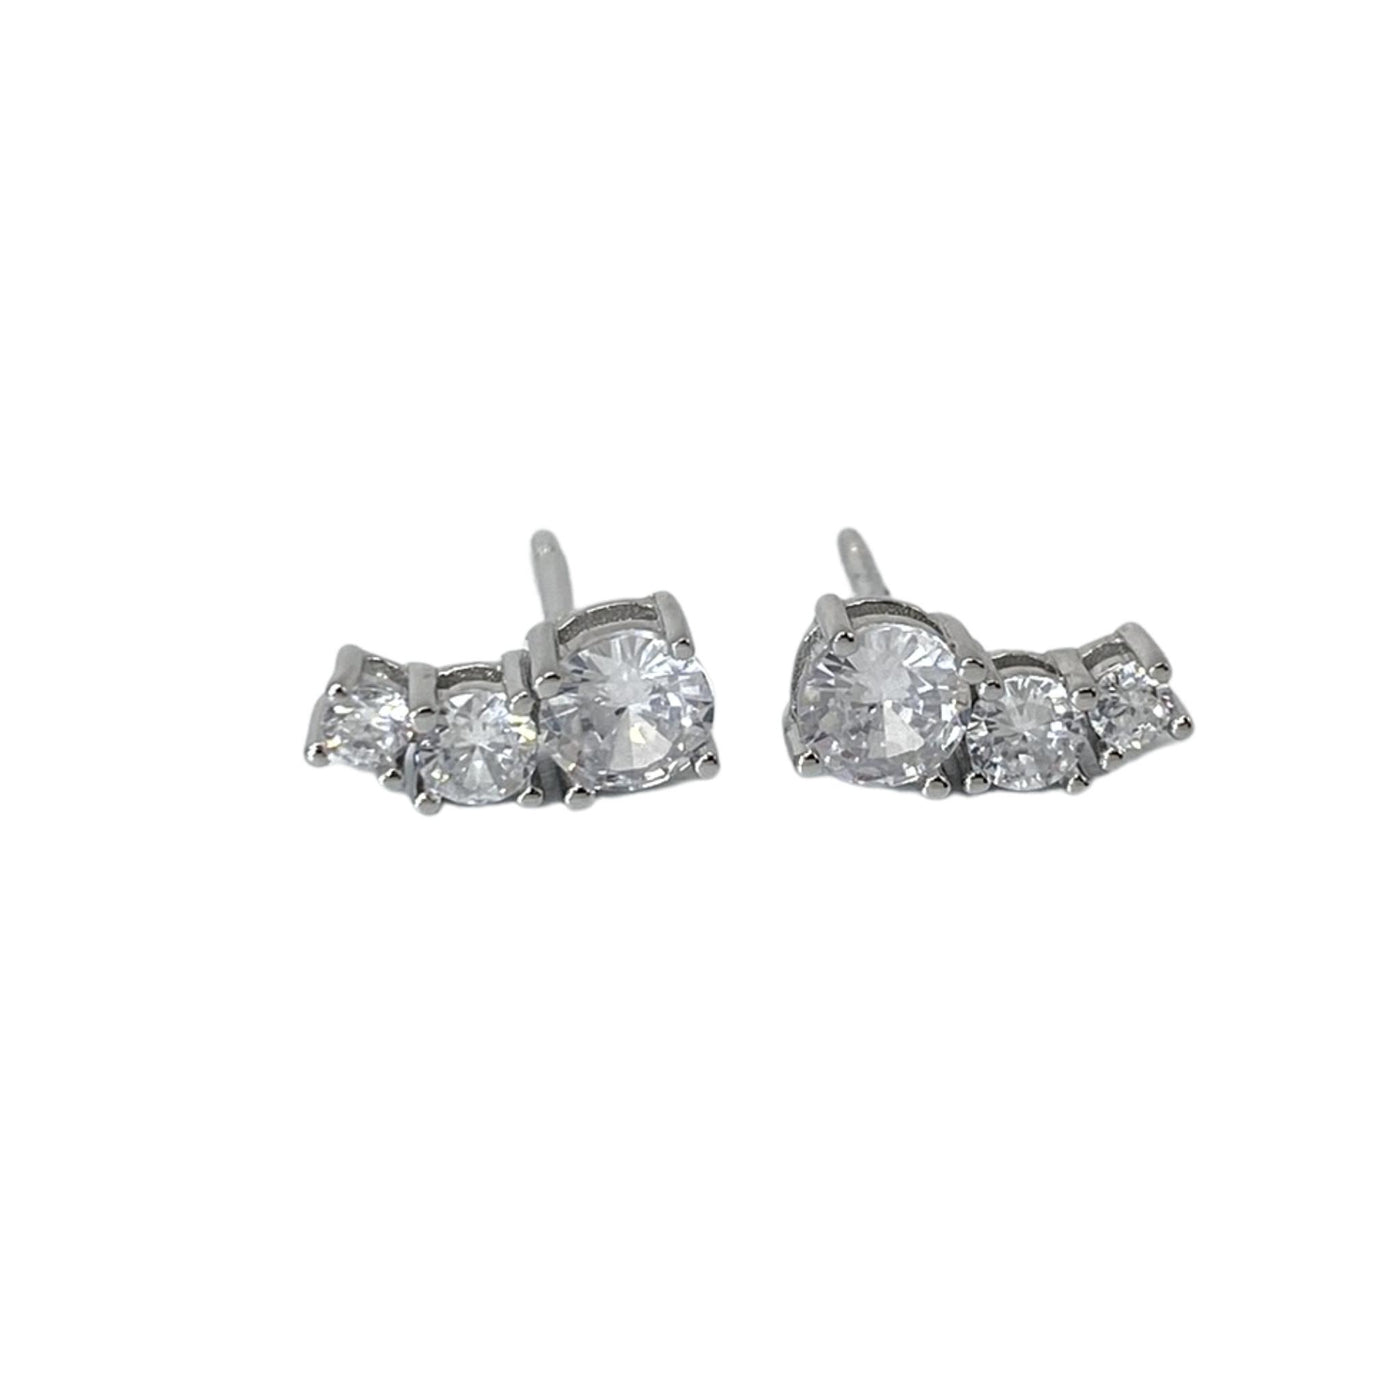 Silver earrings with 3 white zirconia